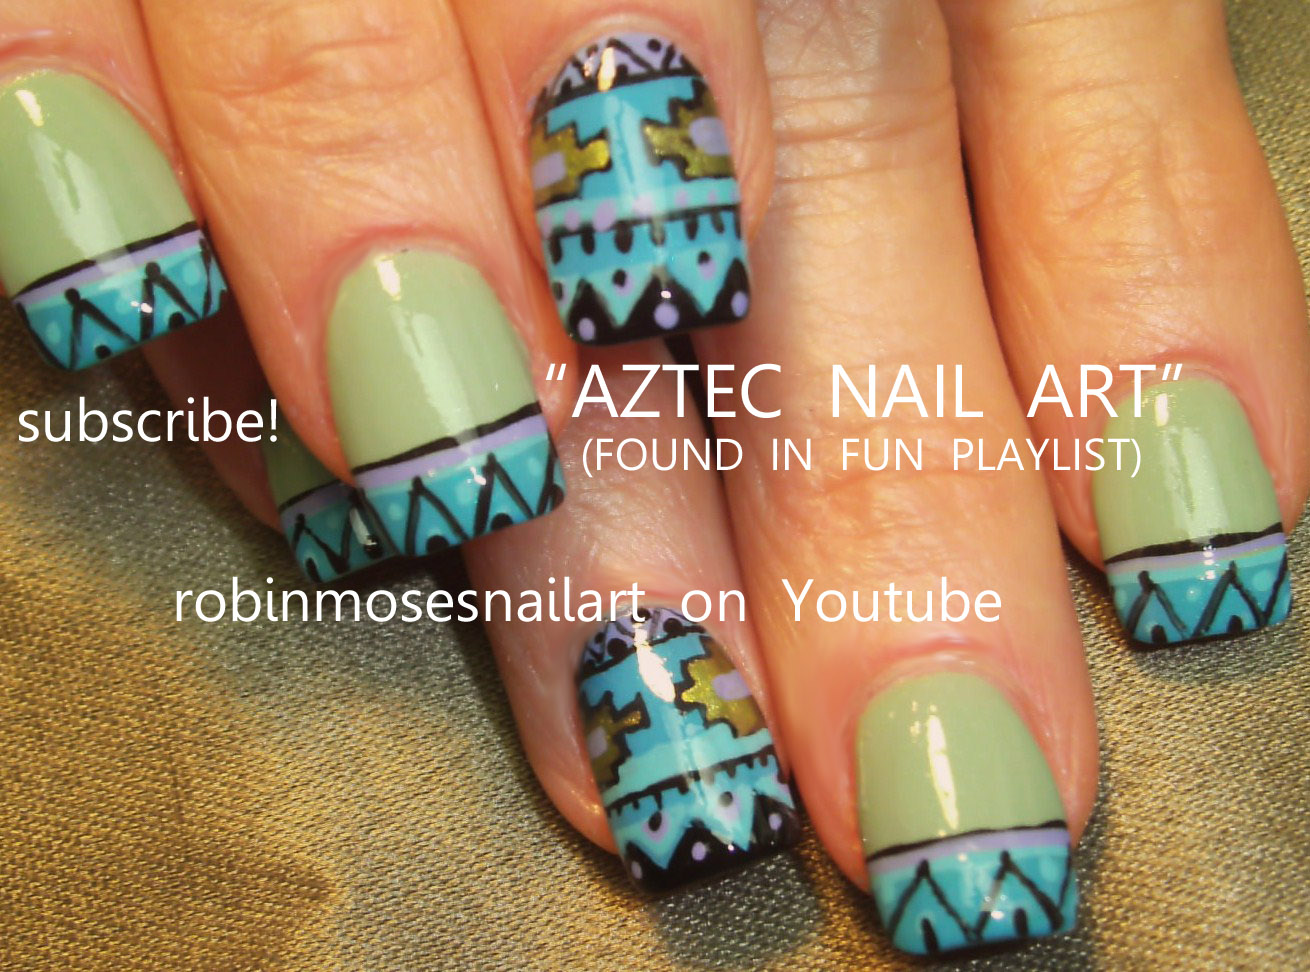 9. Tribal Nail Designs with Aztec Print on Pinterest - wide 8